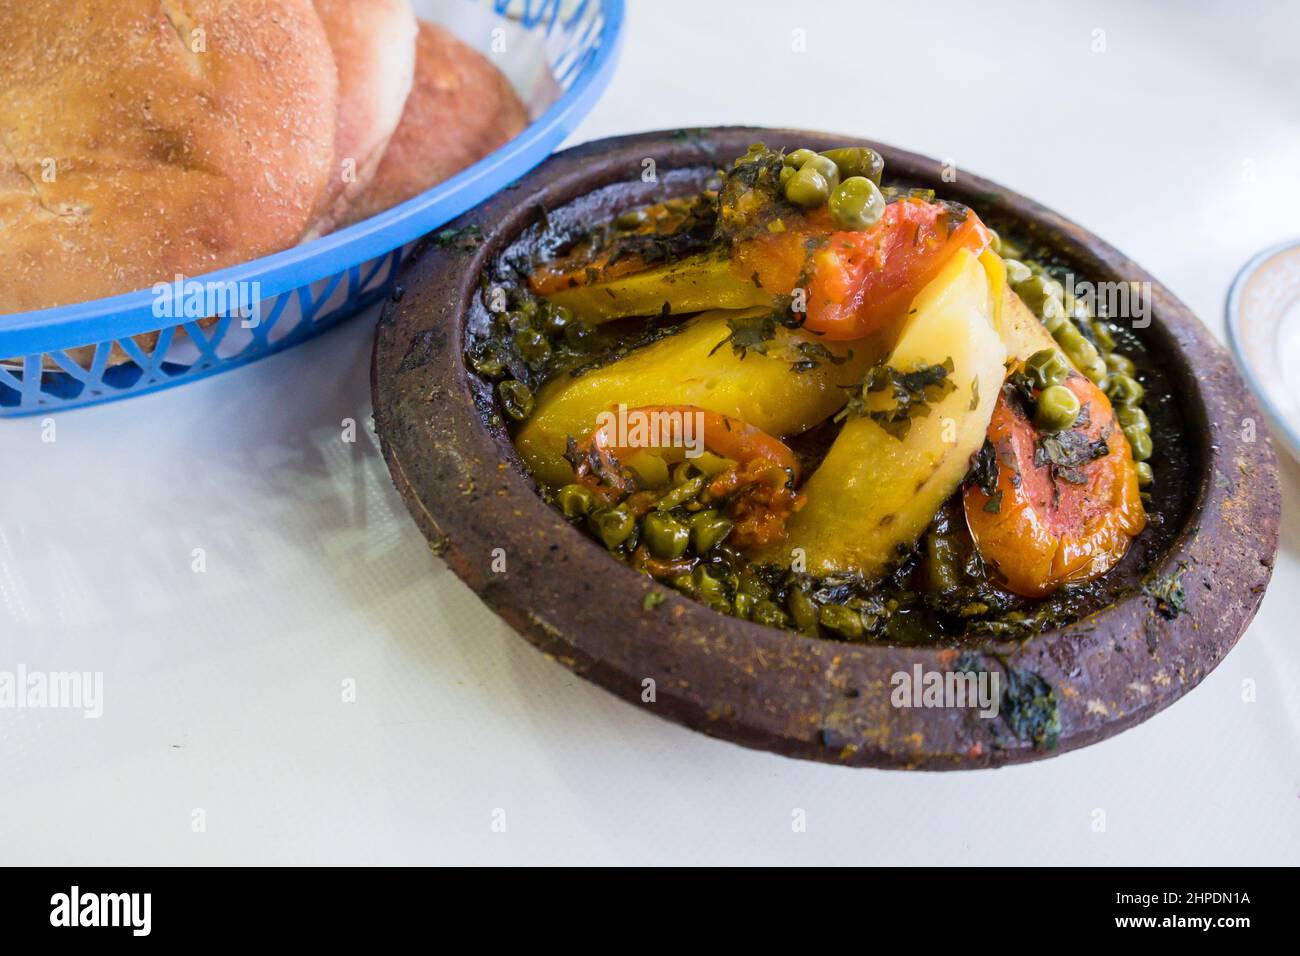 Traditional Moroccan tagine served with buns at a restaurant Stock Photo